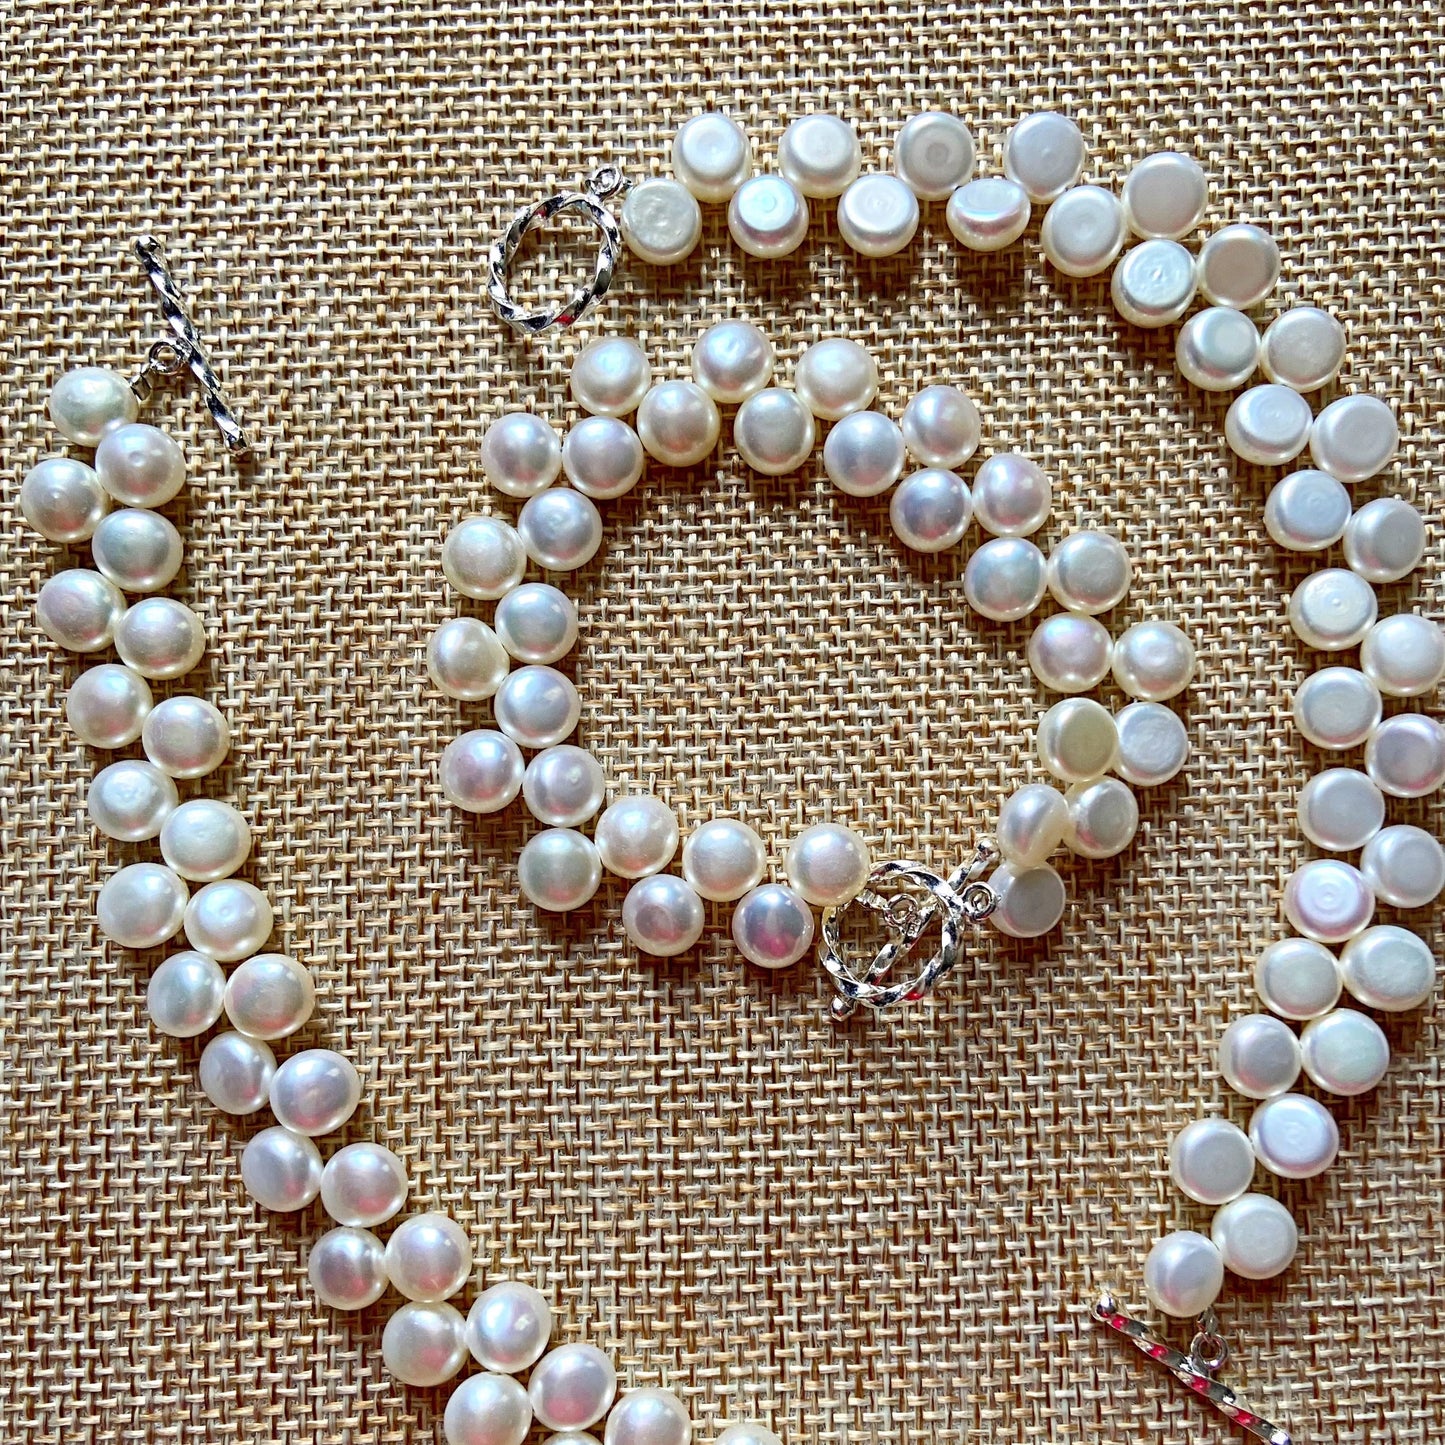 Dainty White Button-Pearl Bracelet with Sterling Silver Toggle Clasp